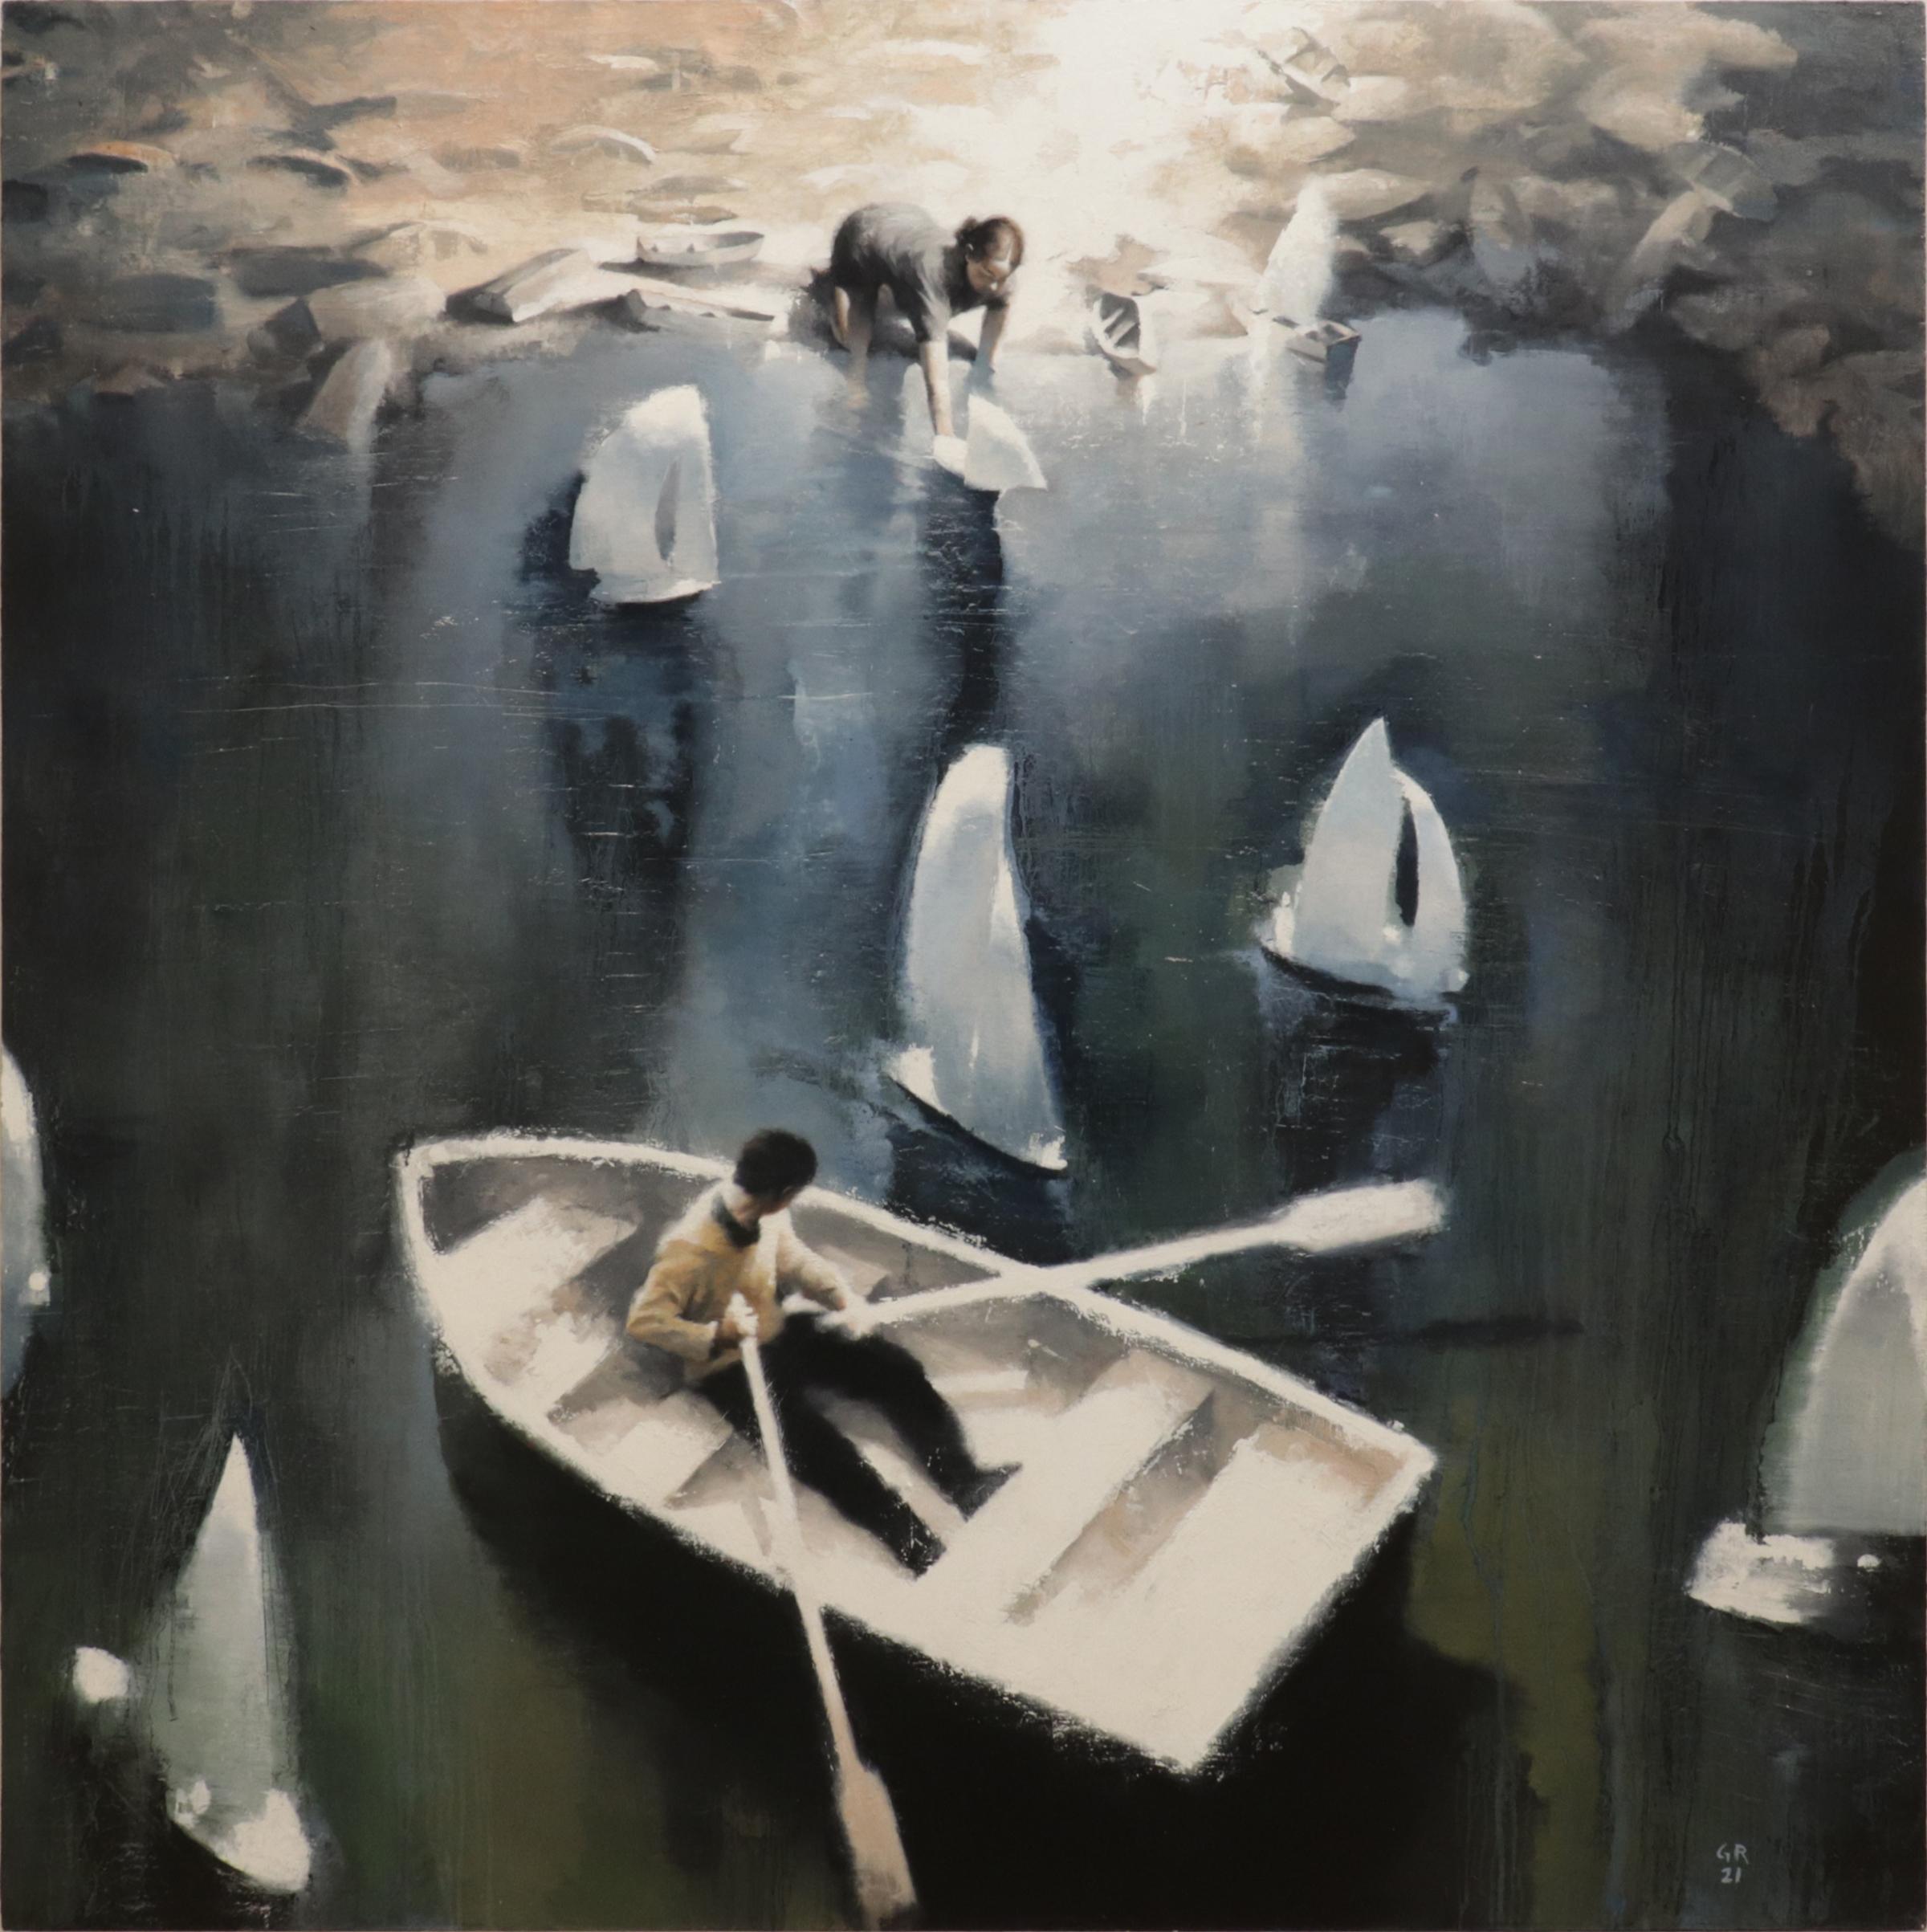 Gary Ruddell Figurative Painting - DAYS WITHOUT END, blue, reflective water, boat, bright light, sailboat, realism